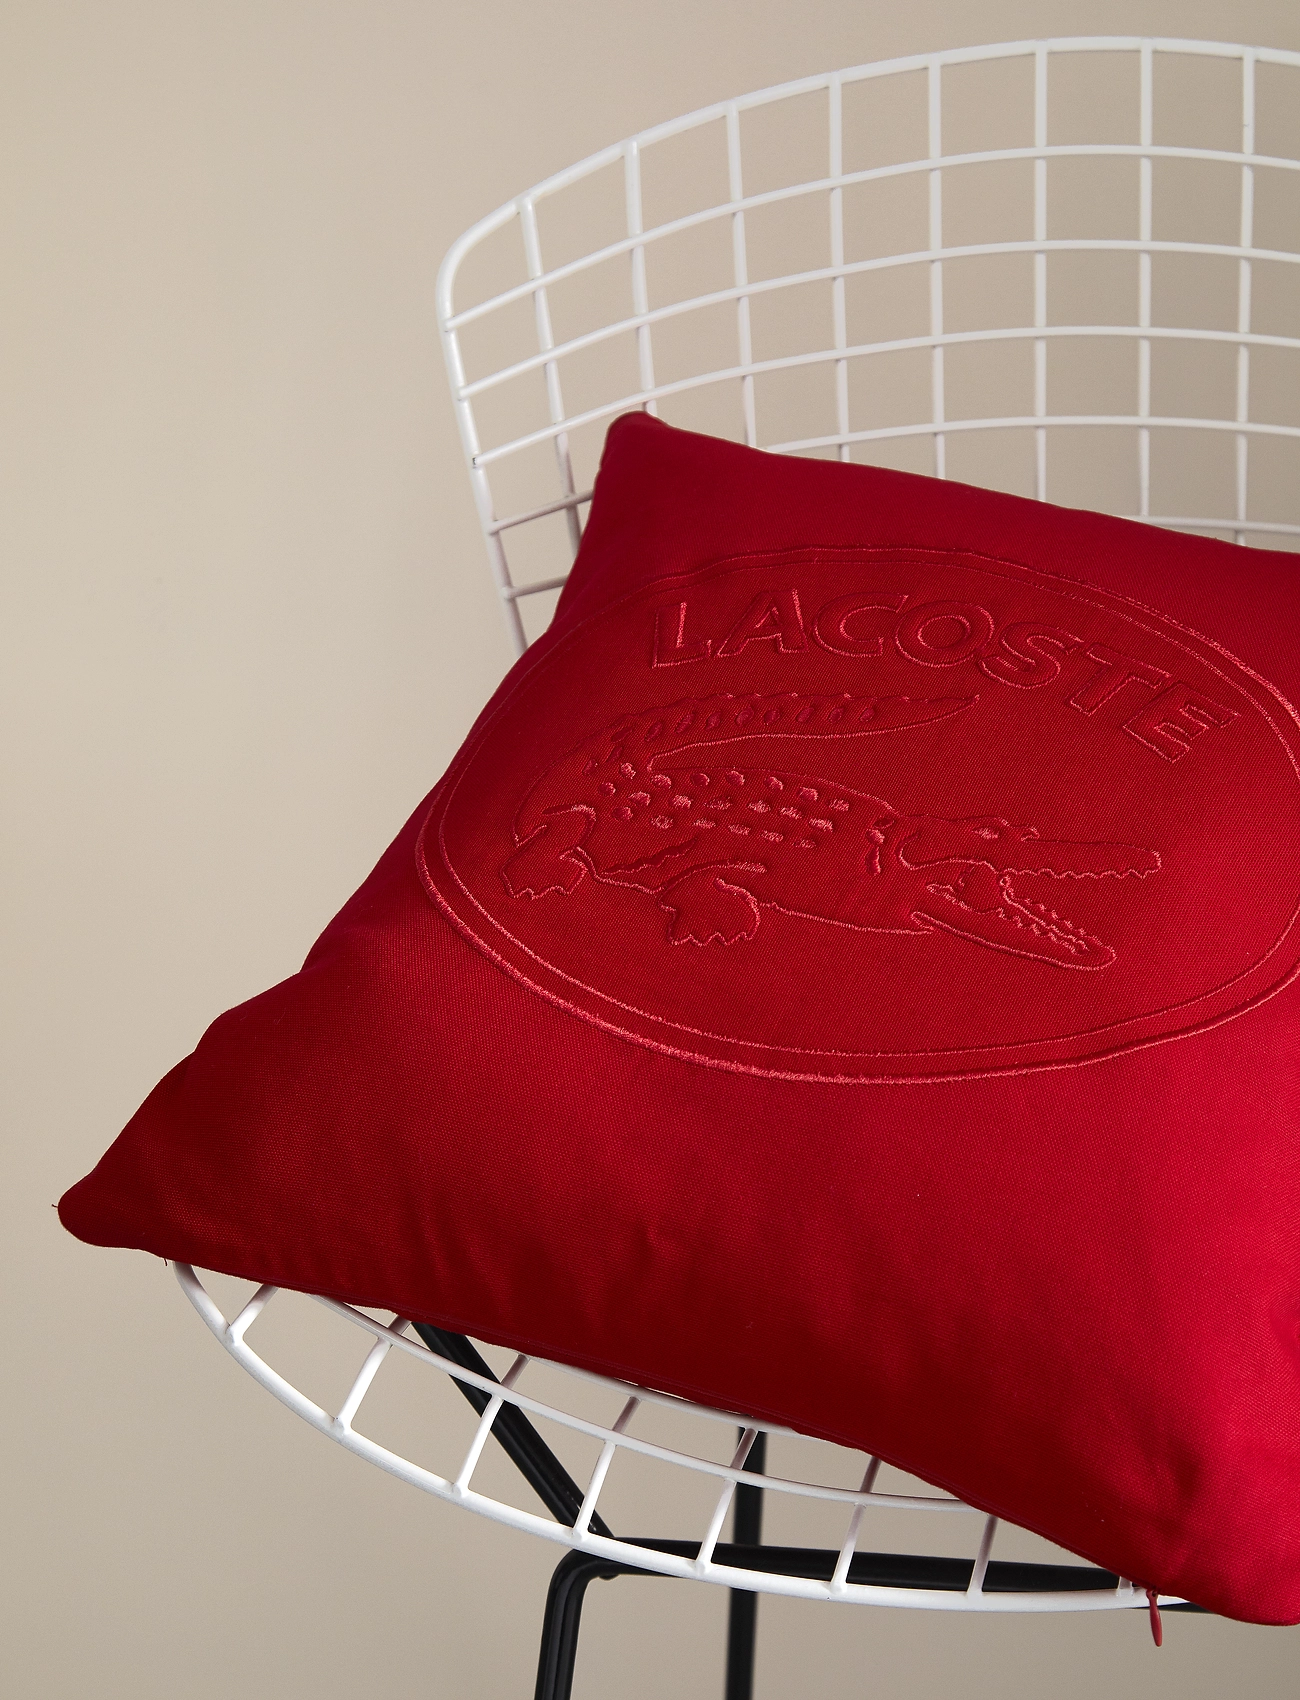 Lacoste Home - LLACOSTE Cushion cover - najniższe ceny - rouge - 1